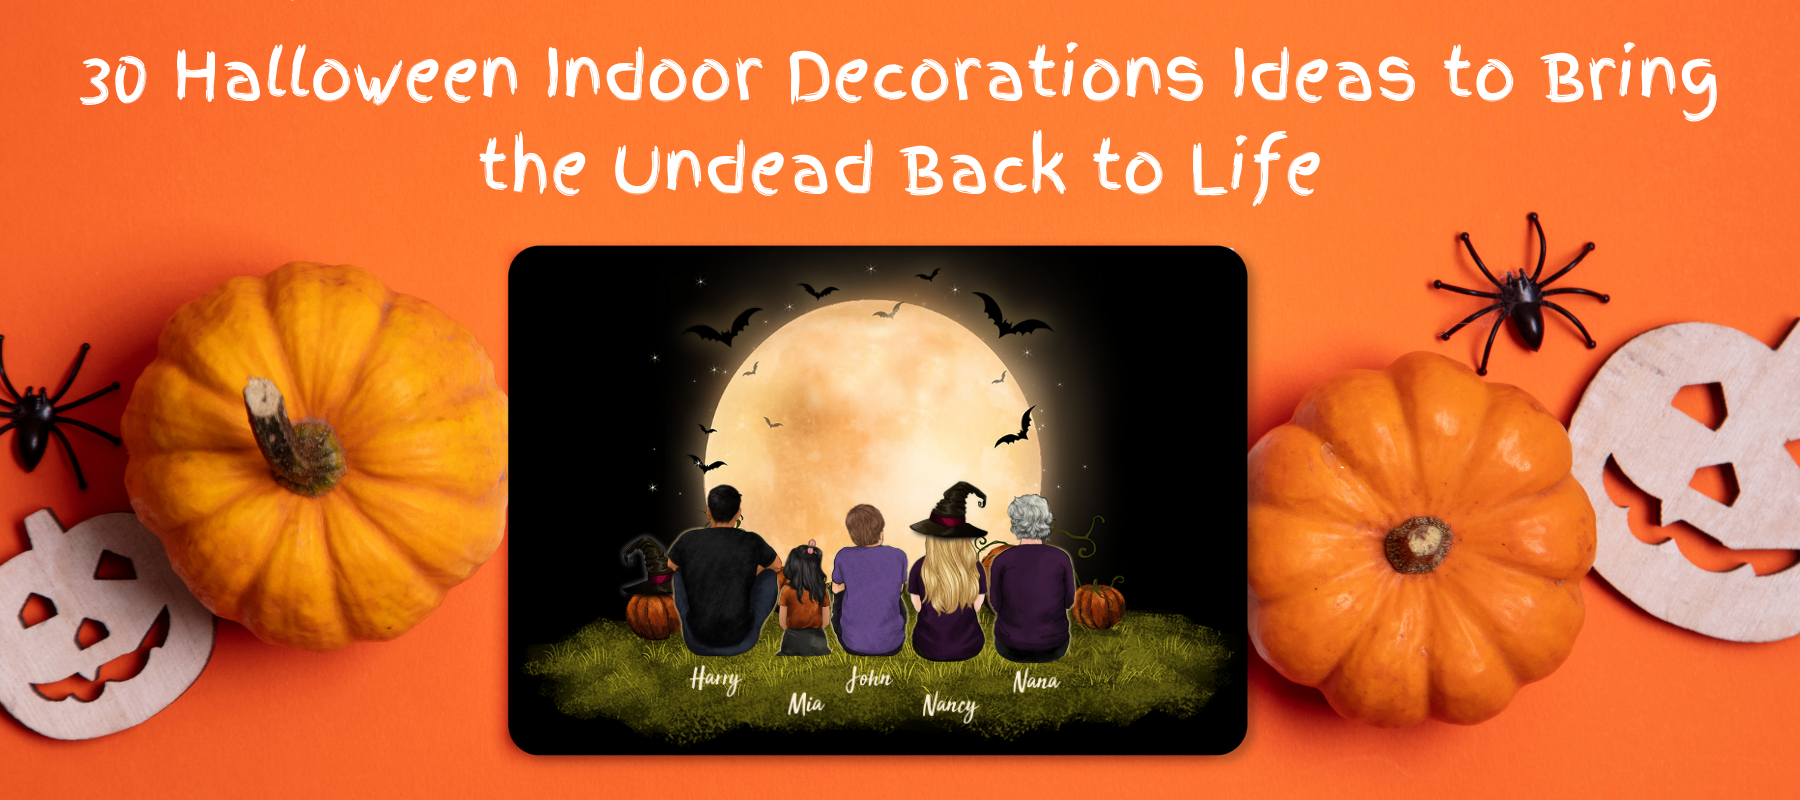 30 Halloween Indoor Decorations Ideas to Bring the Undead Back to Life